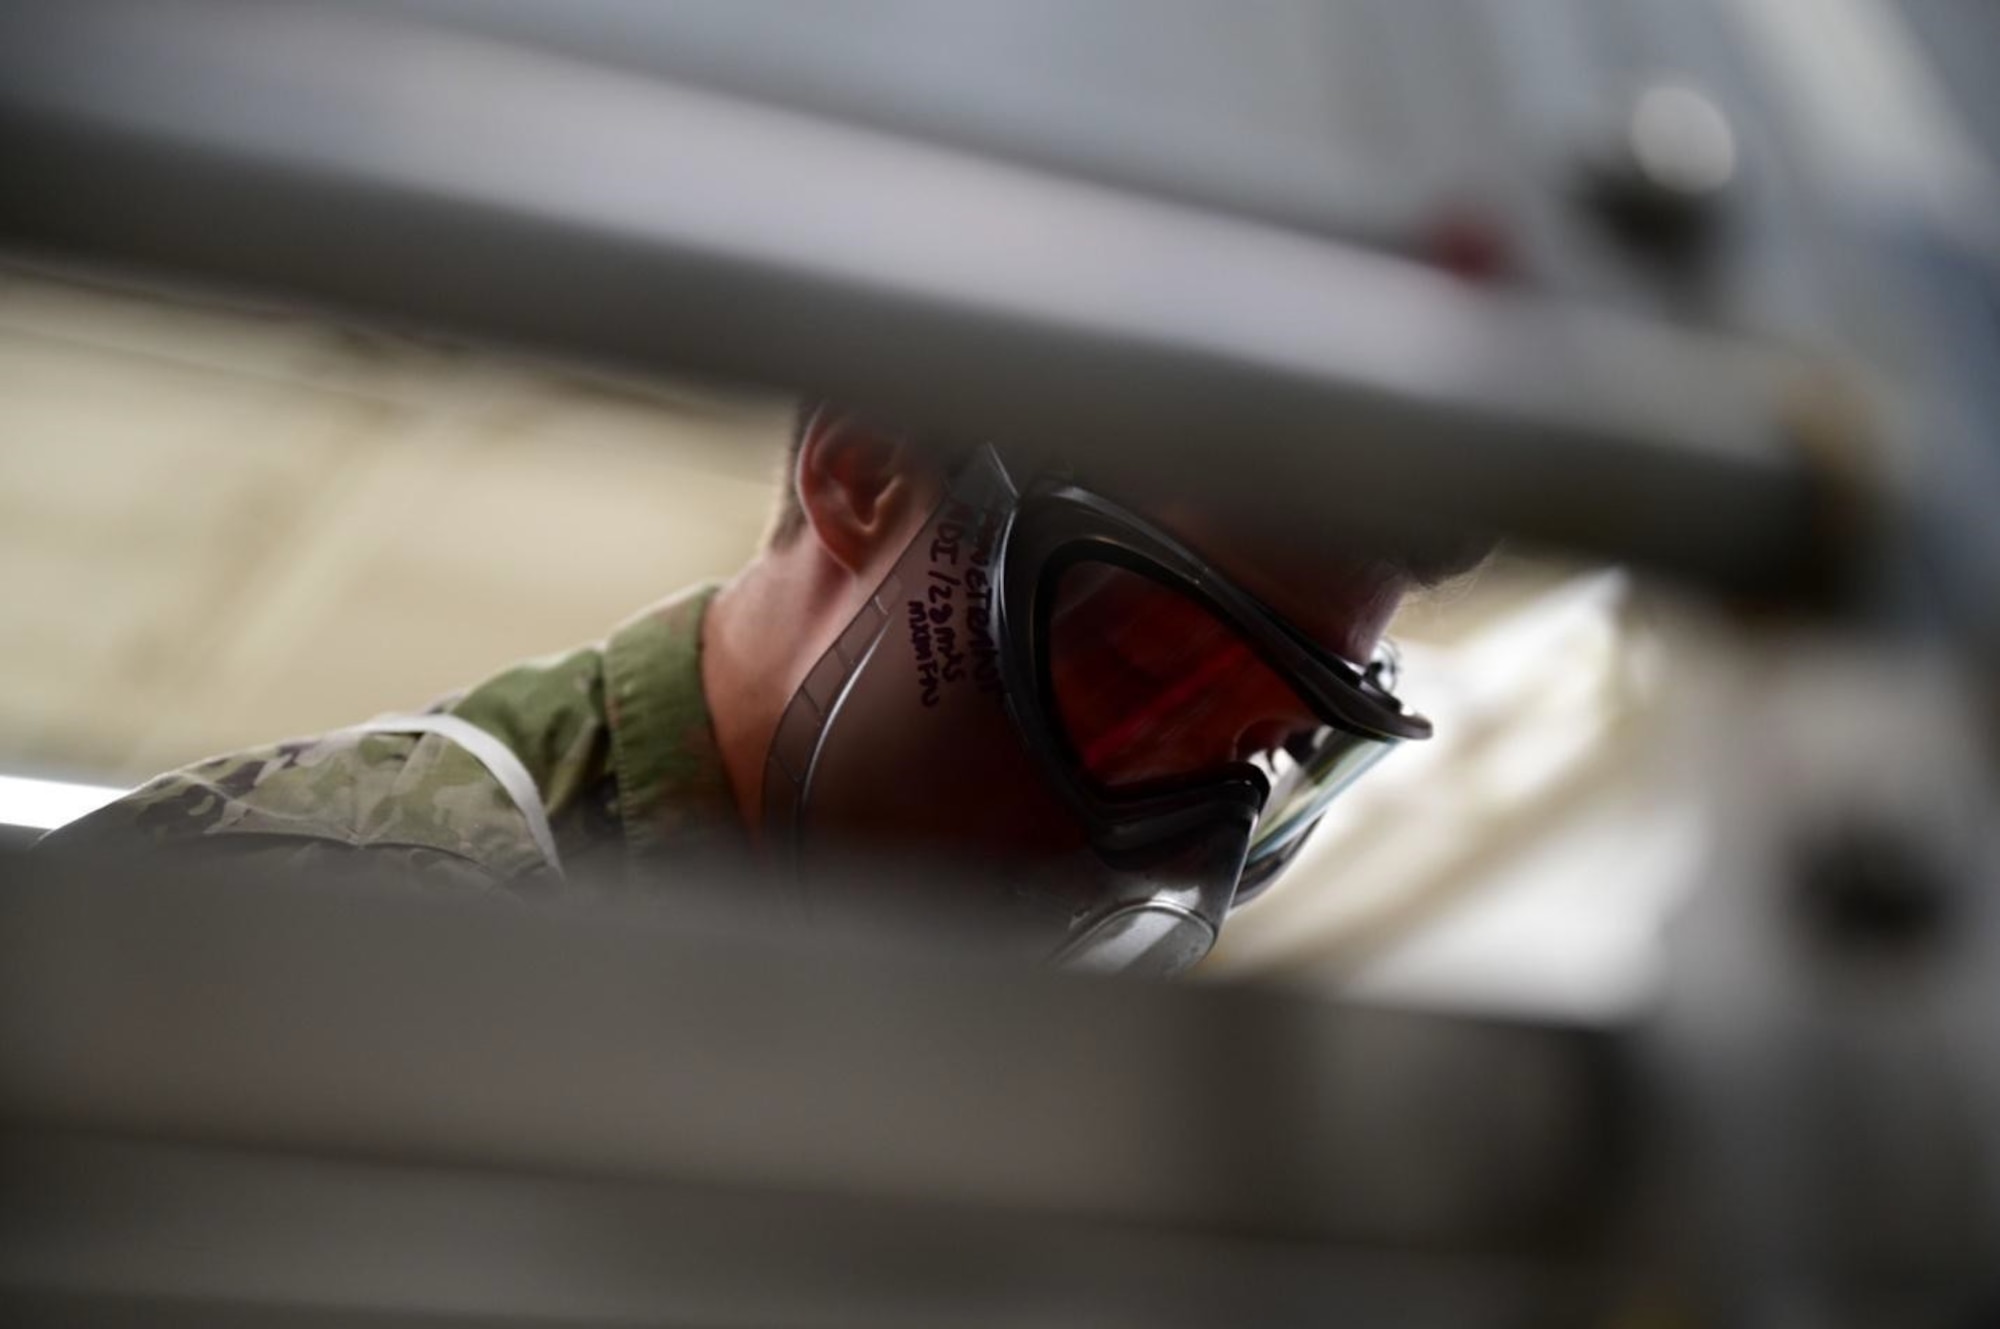 Airman 1st Class Brett Miska, a 28th Maintenance Squadron Fabrication Flight non-destructive inspection apprentice, provides a demonstration of the Fluorescent Penetrant Line within the NDI lab at Ellsworth Air Force Base, S.D., July 13, 2022.